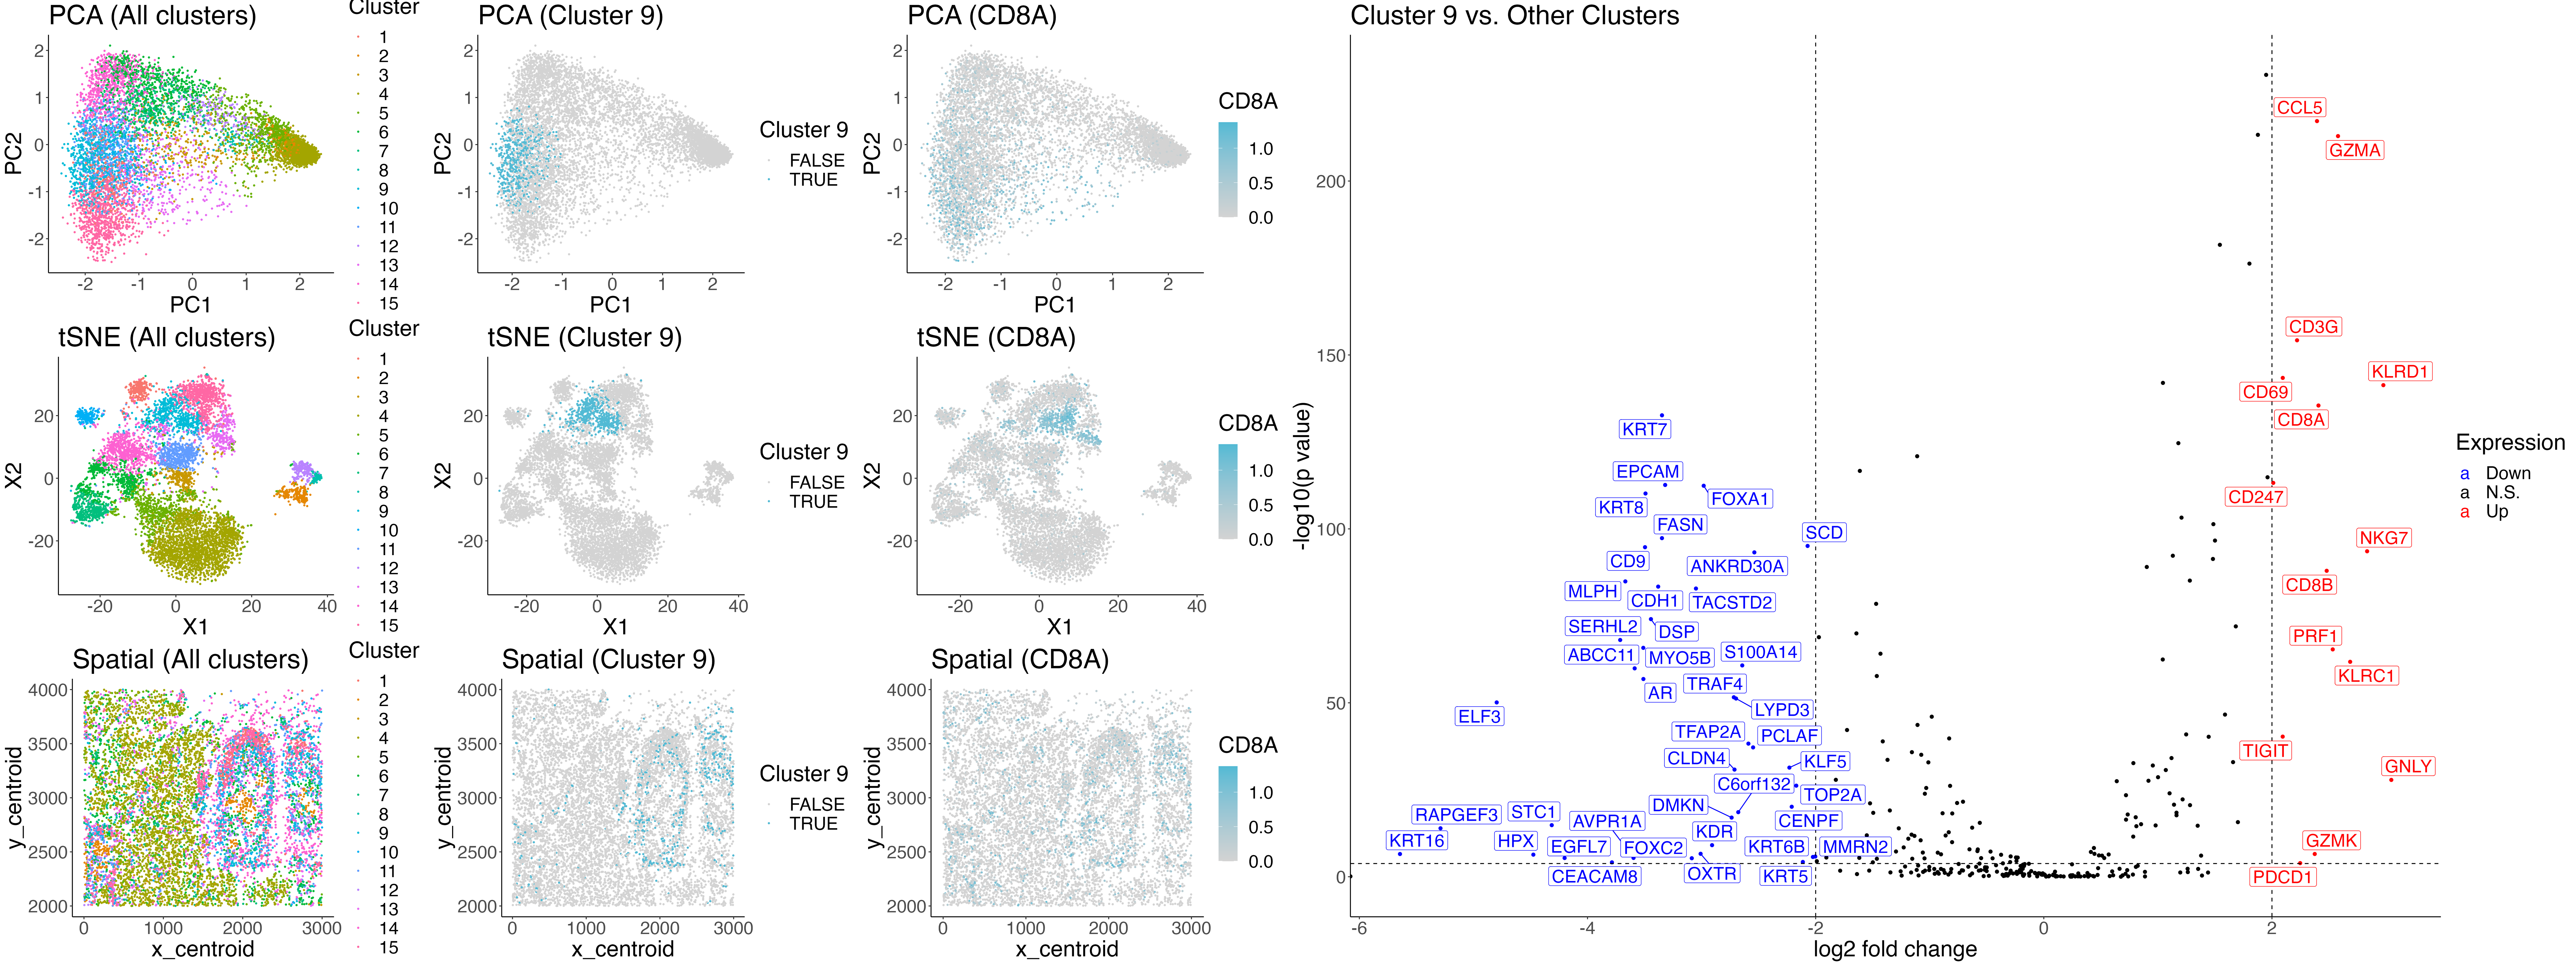 Identification of a Cluster Associated with CD8+ T cells